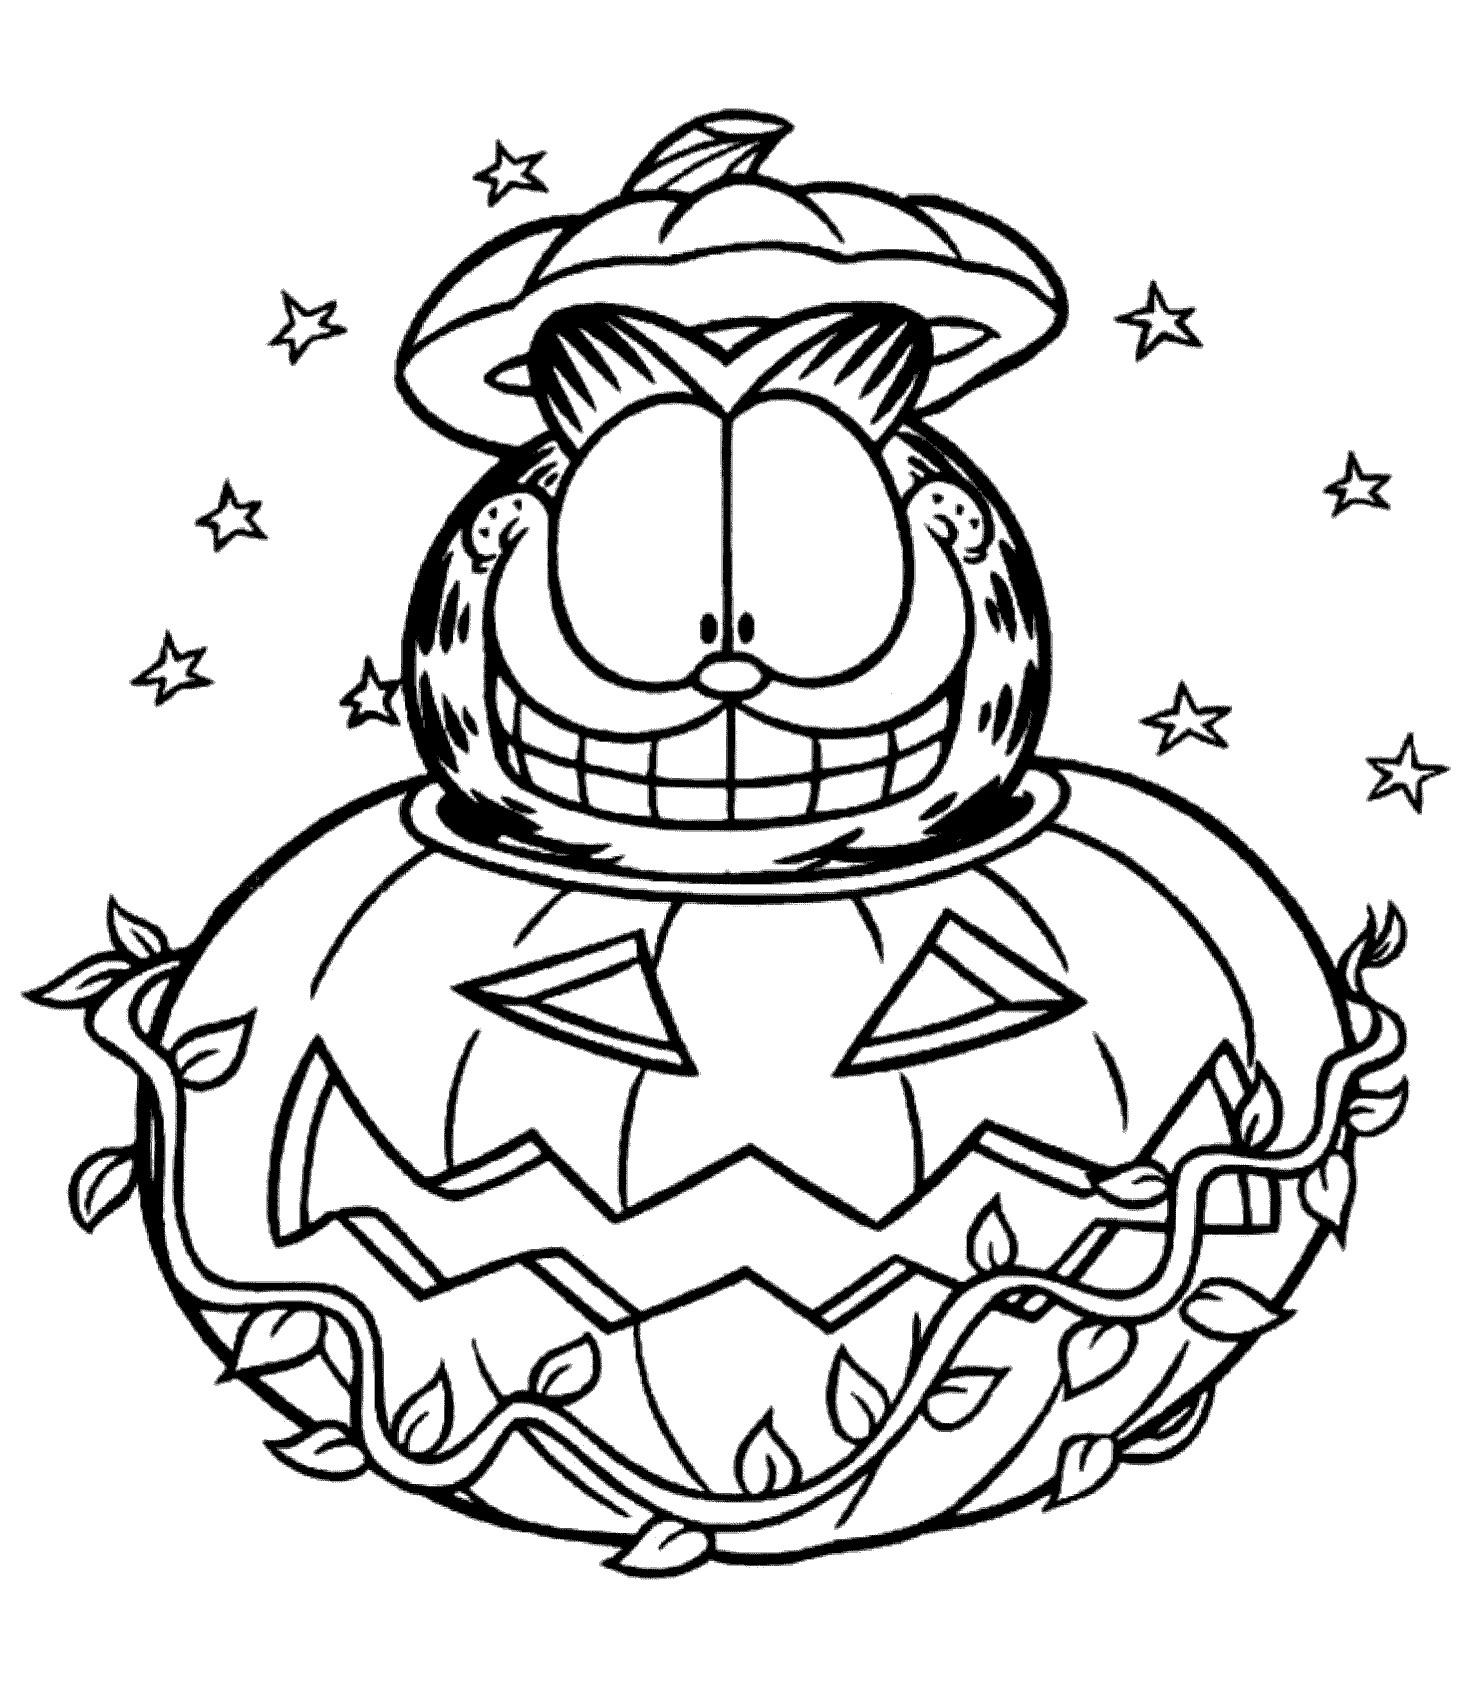 Best Free Halloween Coloring Sheets For Kids
 Garfield Halloween Coloring Pages For Kids Printable Free